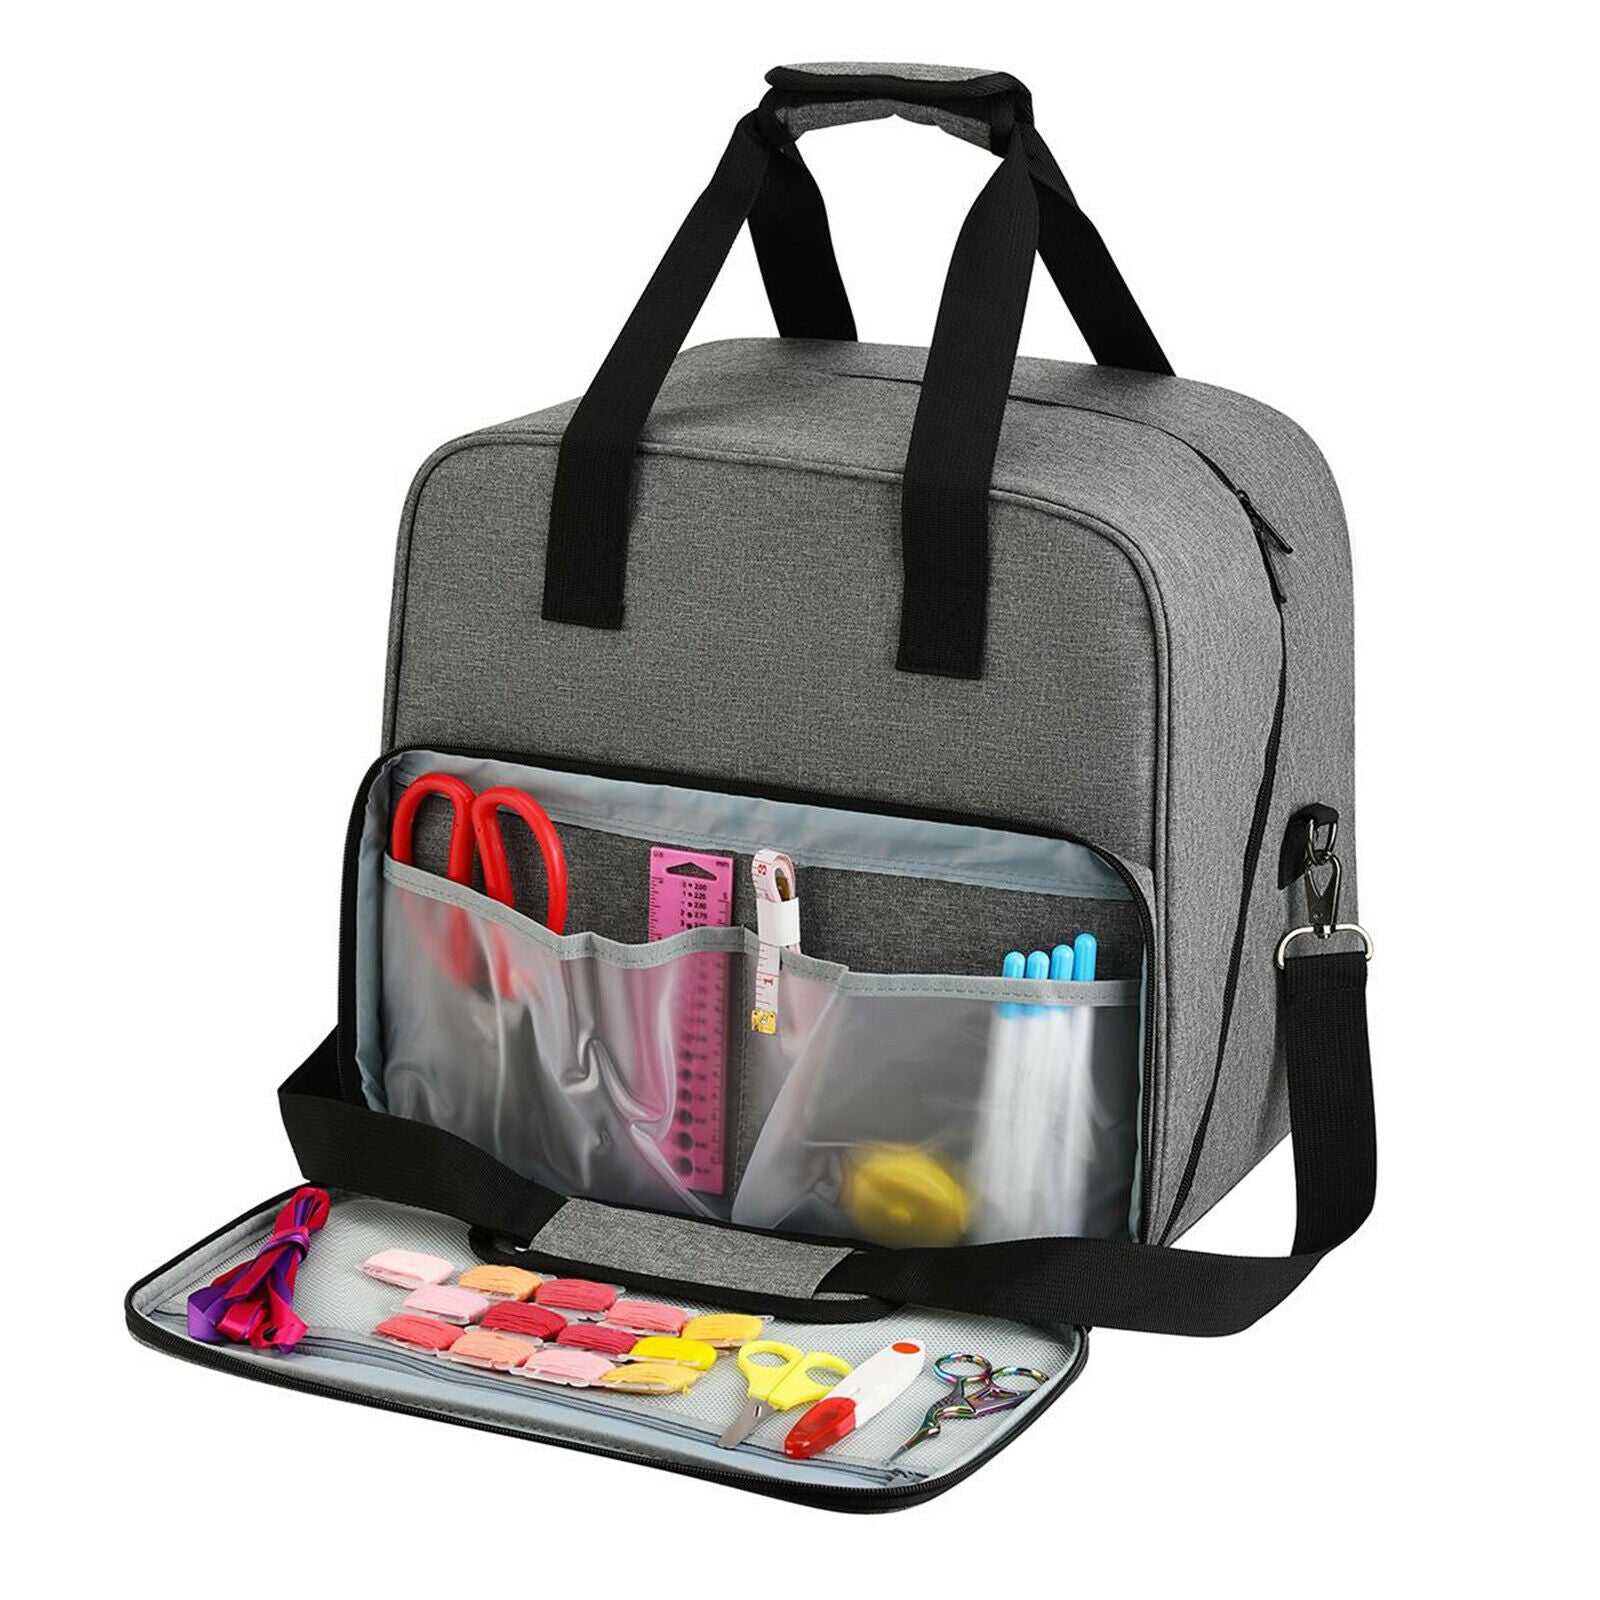 Sewing Machine Carrying Bag with Extra Pocket, Tote Bag for Sewing Machine Case